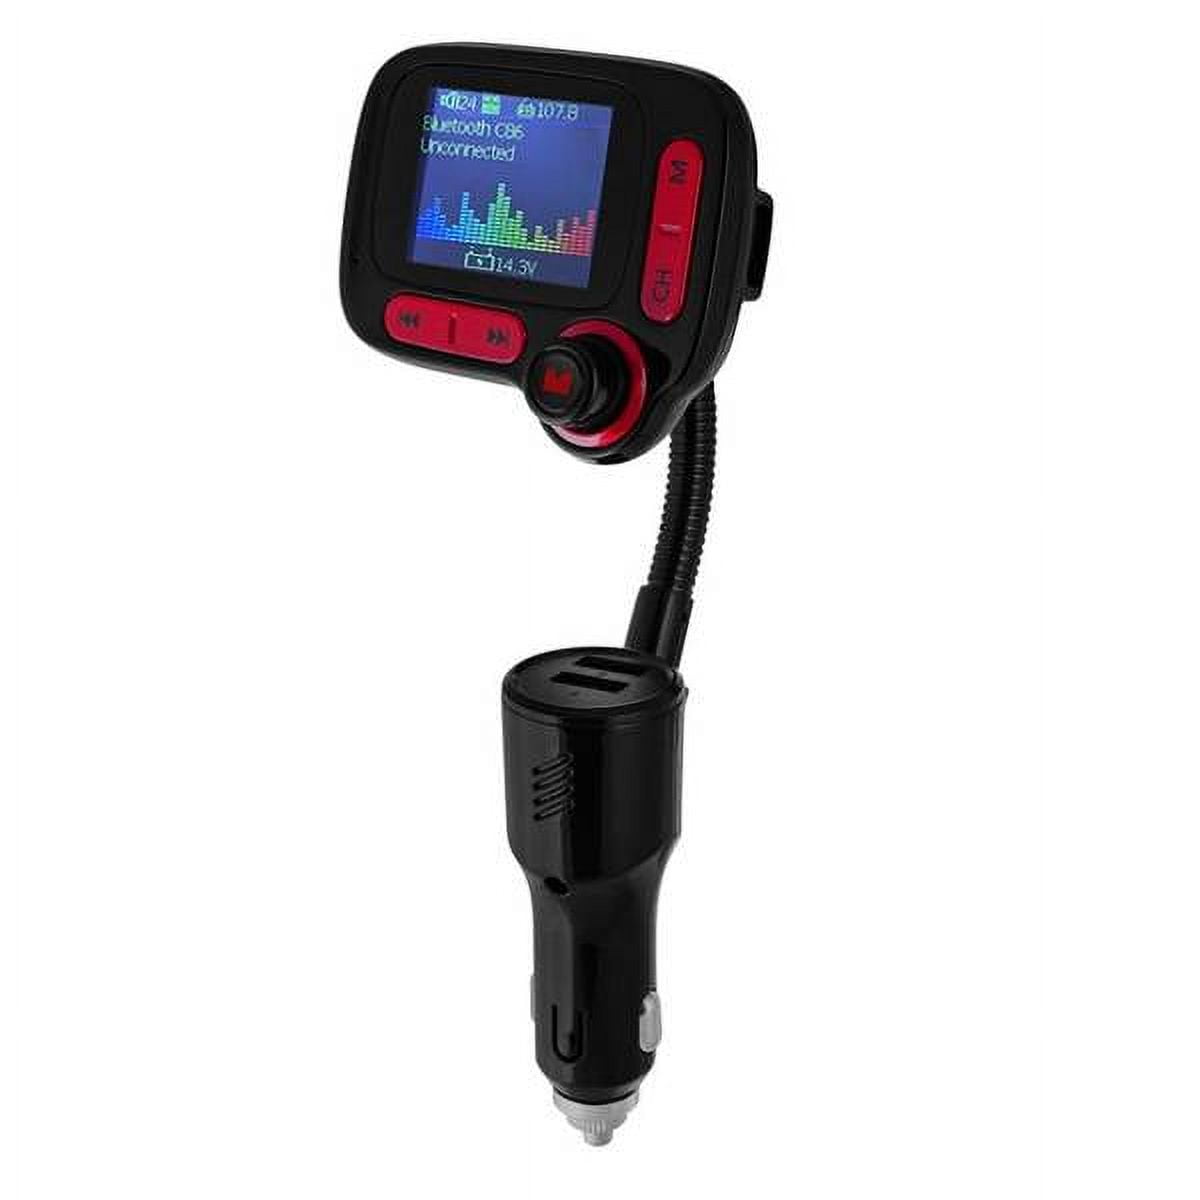 Hatatit Bluetooth FM transmitter car wireless radio adapter kit W 1.8-inch  color display S Hands-free call AUX input/output SD/TF card USB charger  QC3.0 suitable for all smartphone audio players 